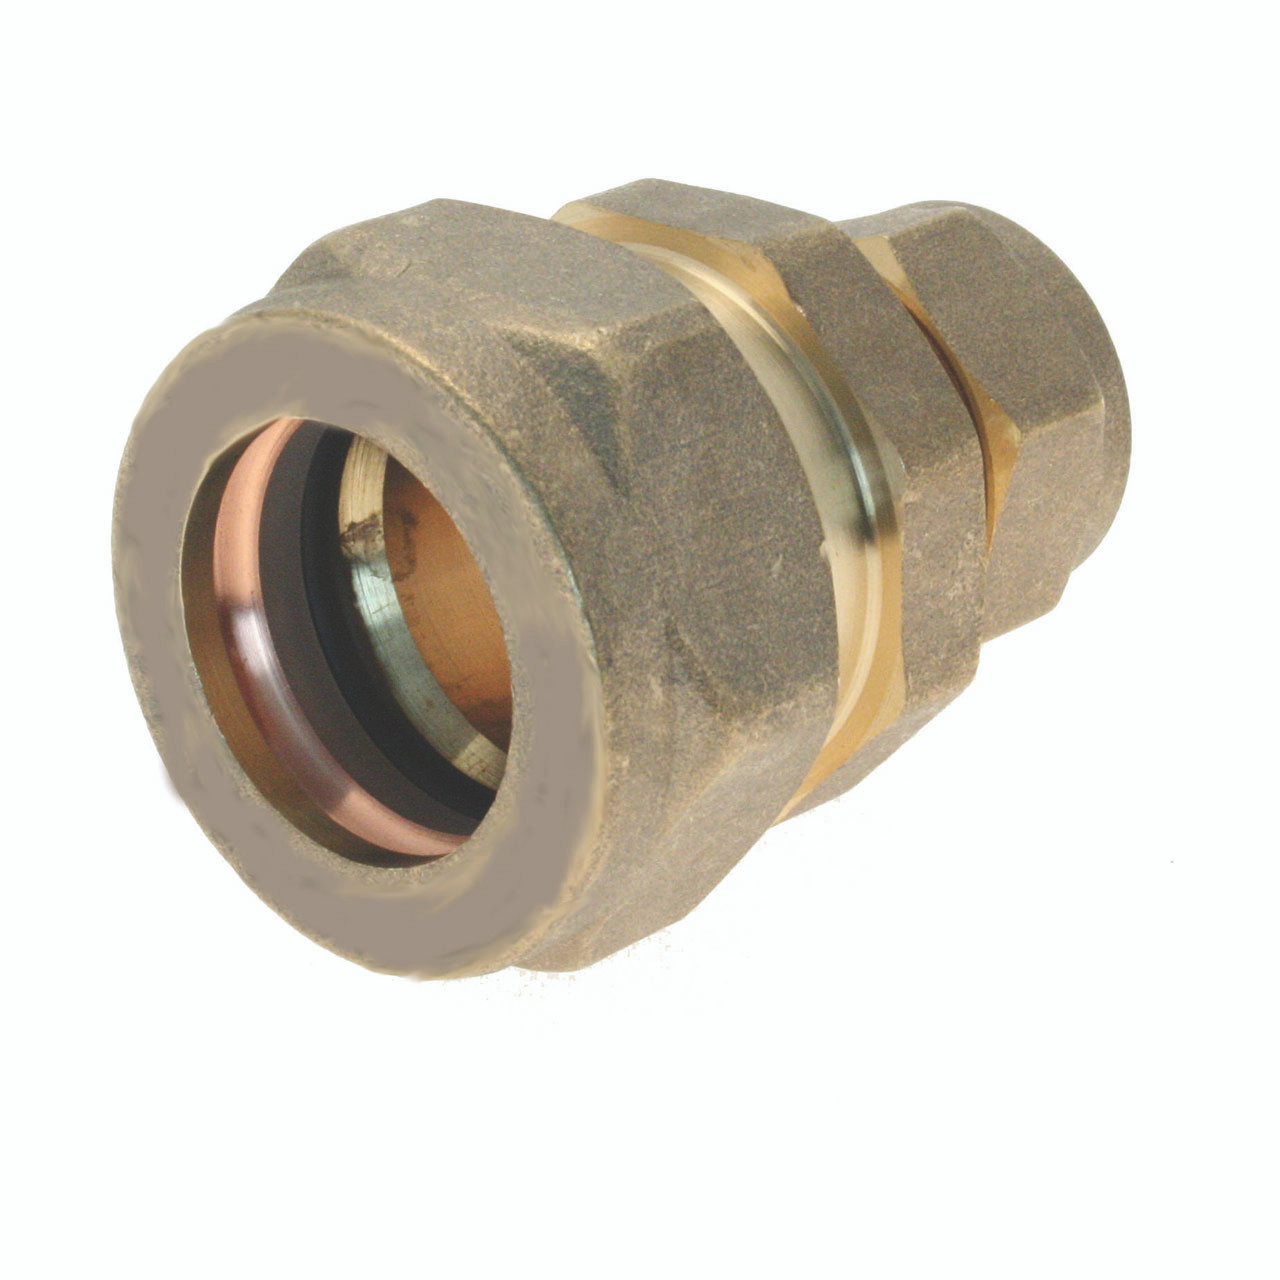 Photograph of ?" x 6lb Lead x 15mm Copper Adapter